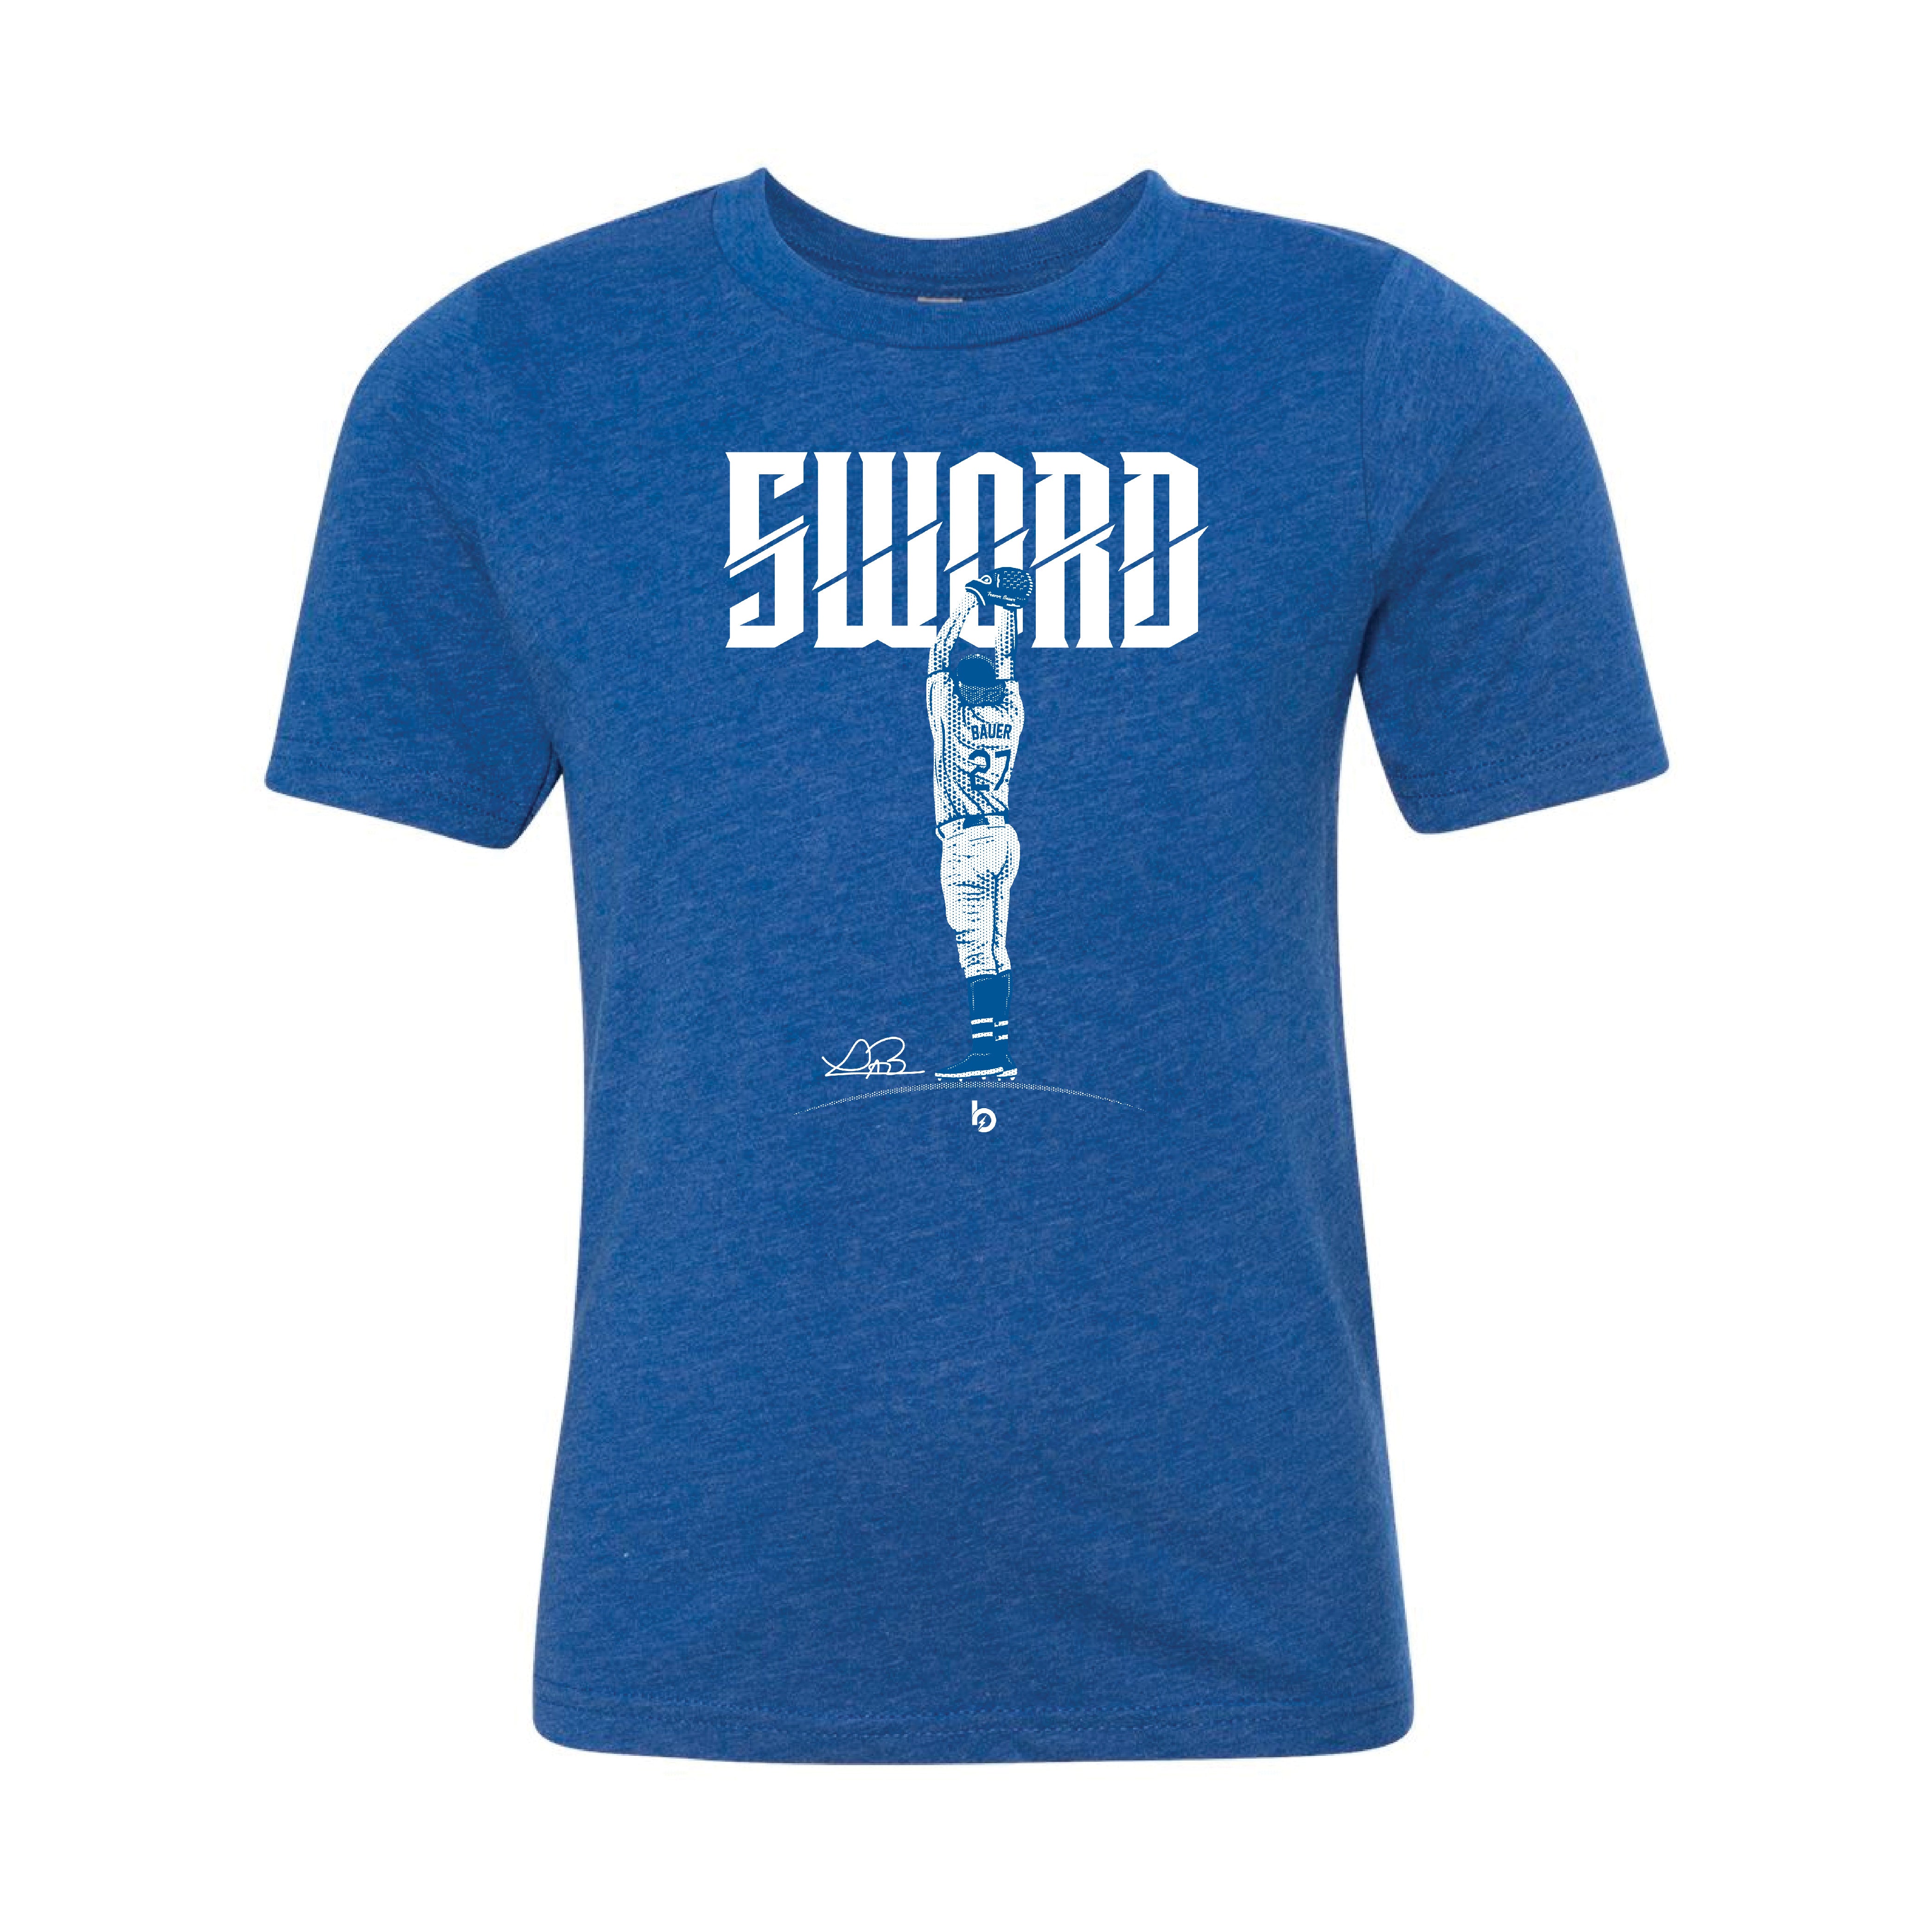 Bauer Outage Sword Tee